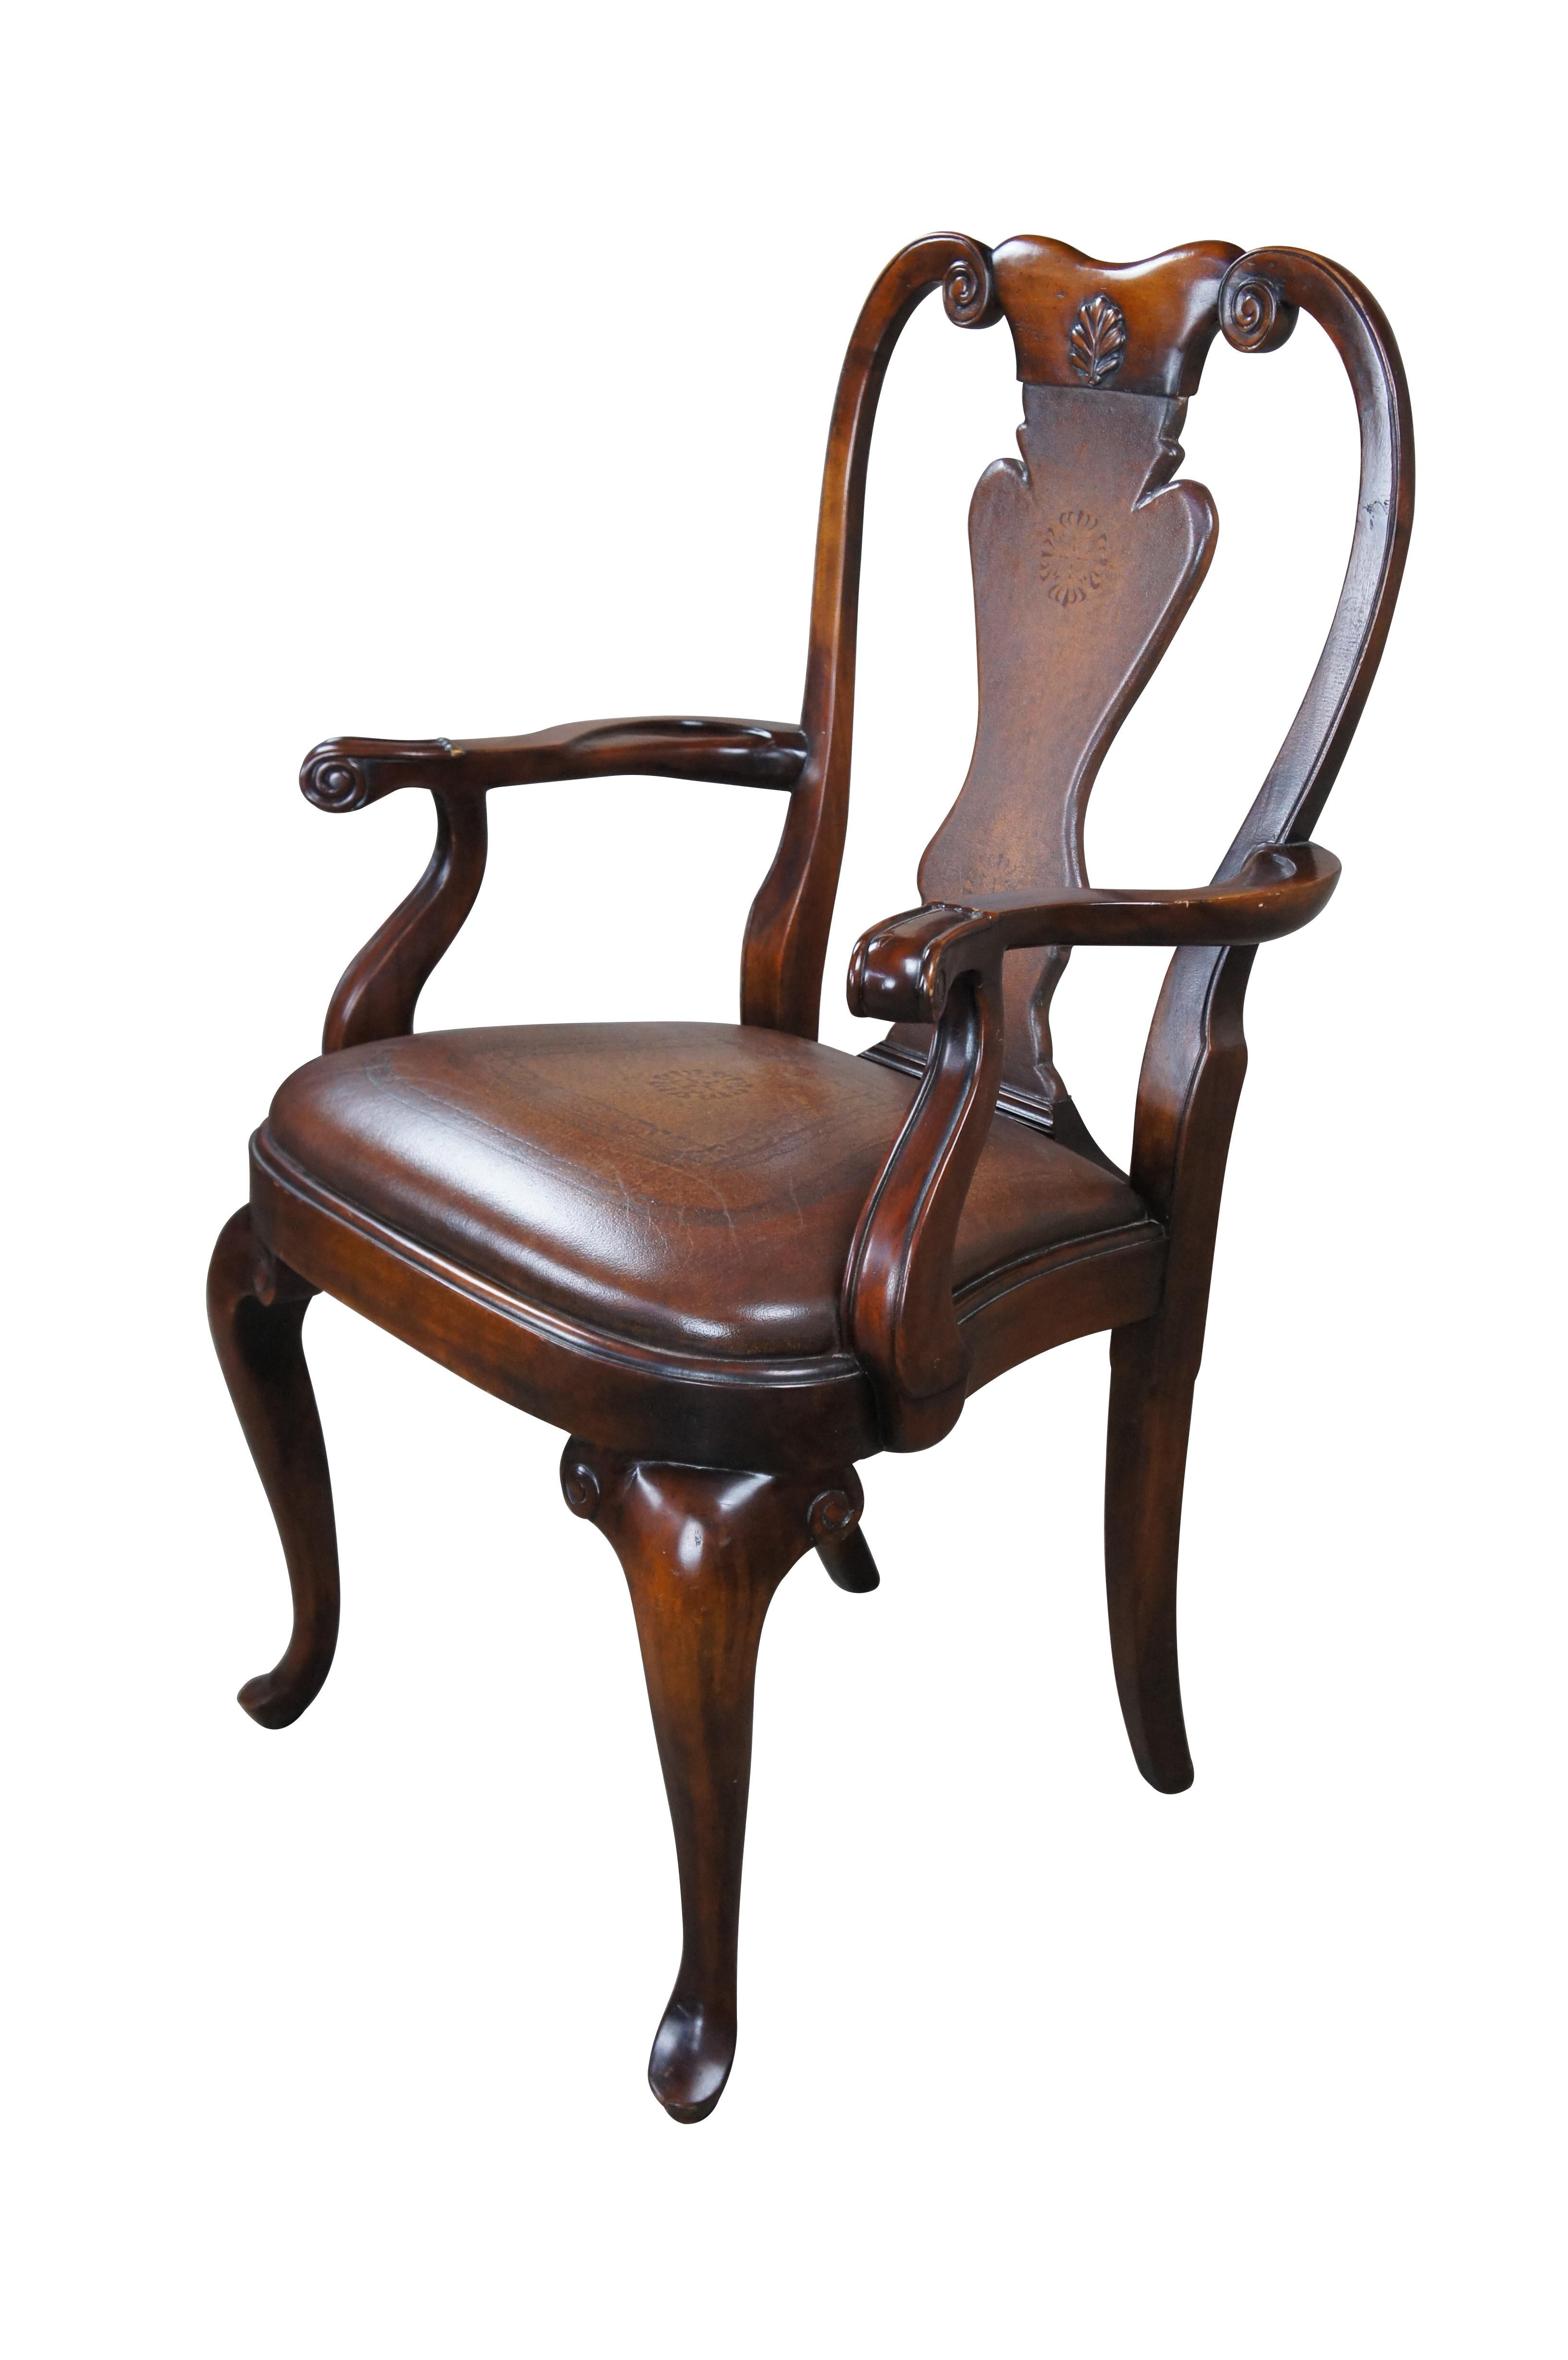 A stately arm chair by Theodore Alexander. Modeled after a traditional Georgian Period Queen Anne chair. Features a mahogany frame with scrolled and carved crest rail over a brown tooled leather vase shaped splat, matching seat and cabriole